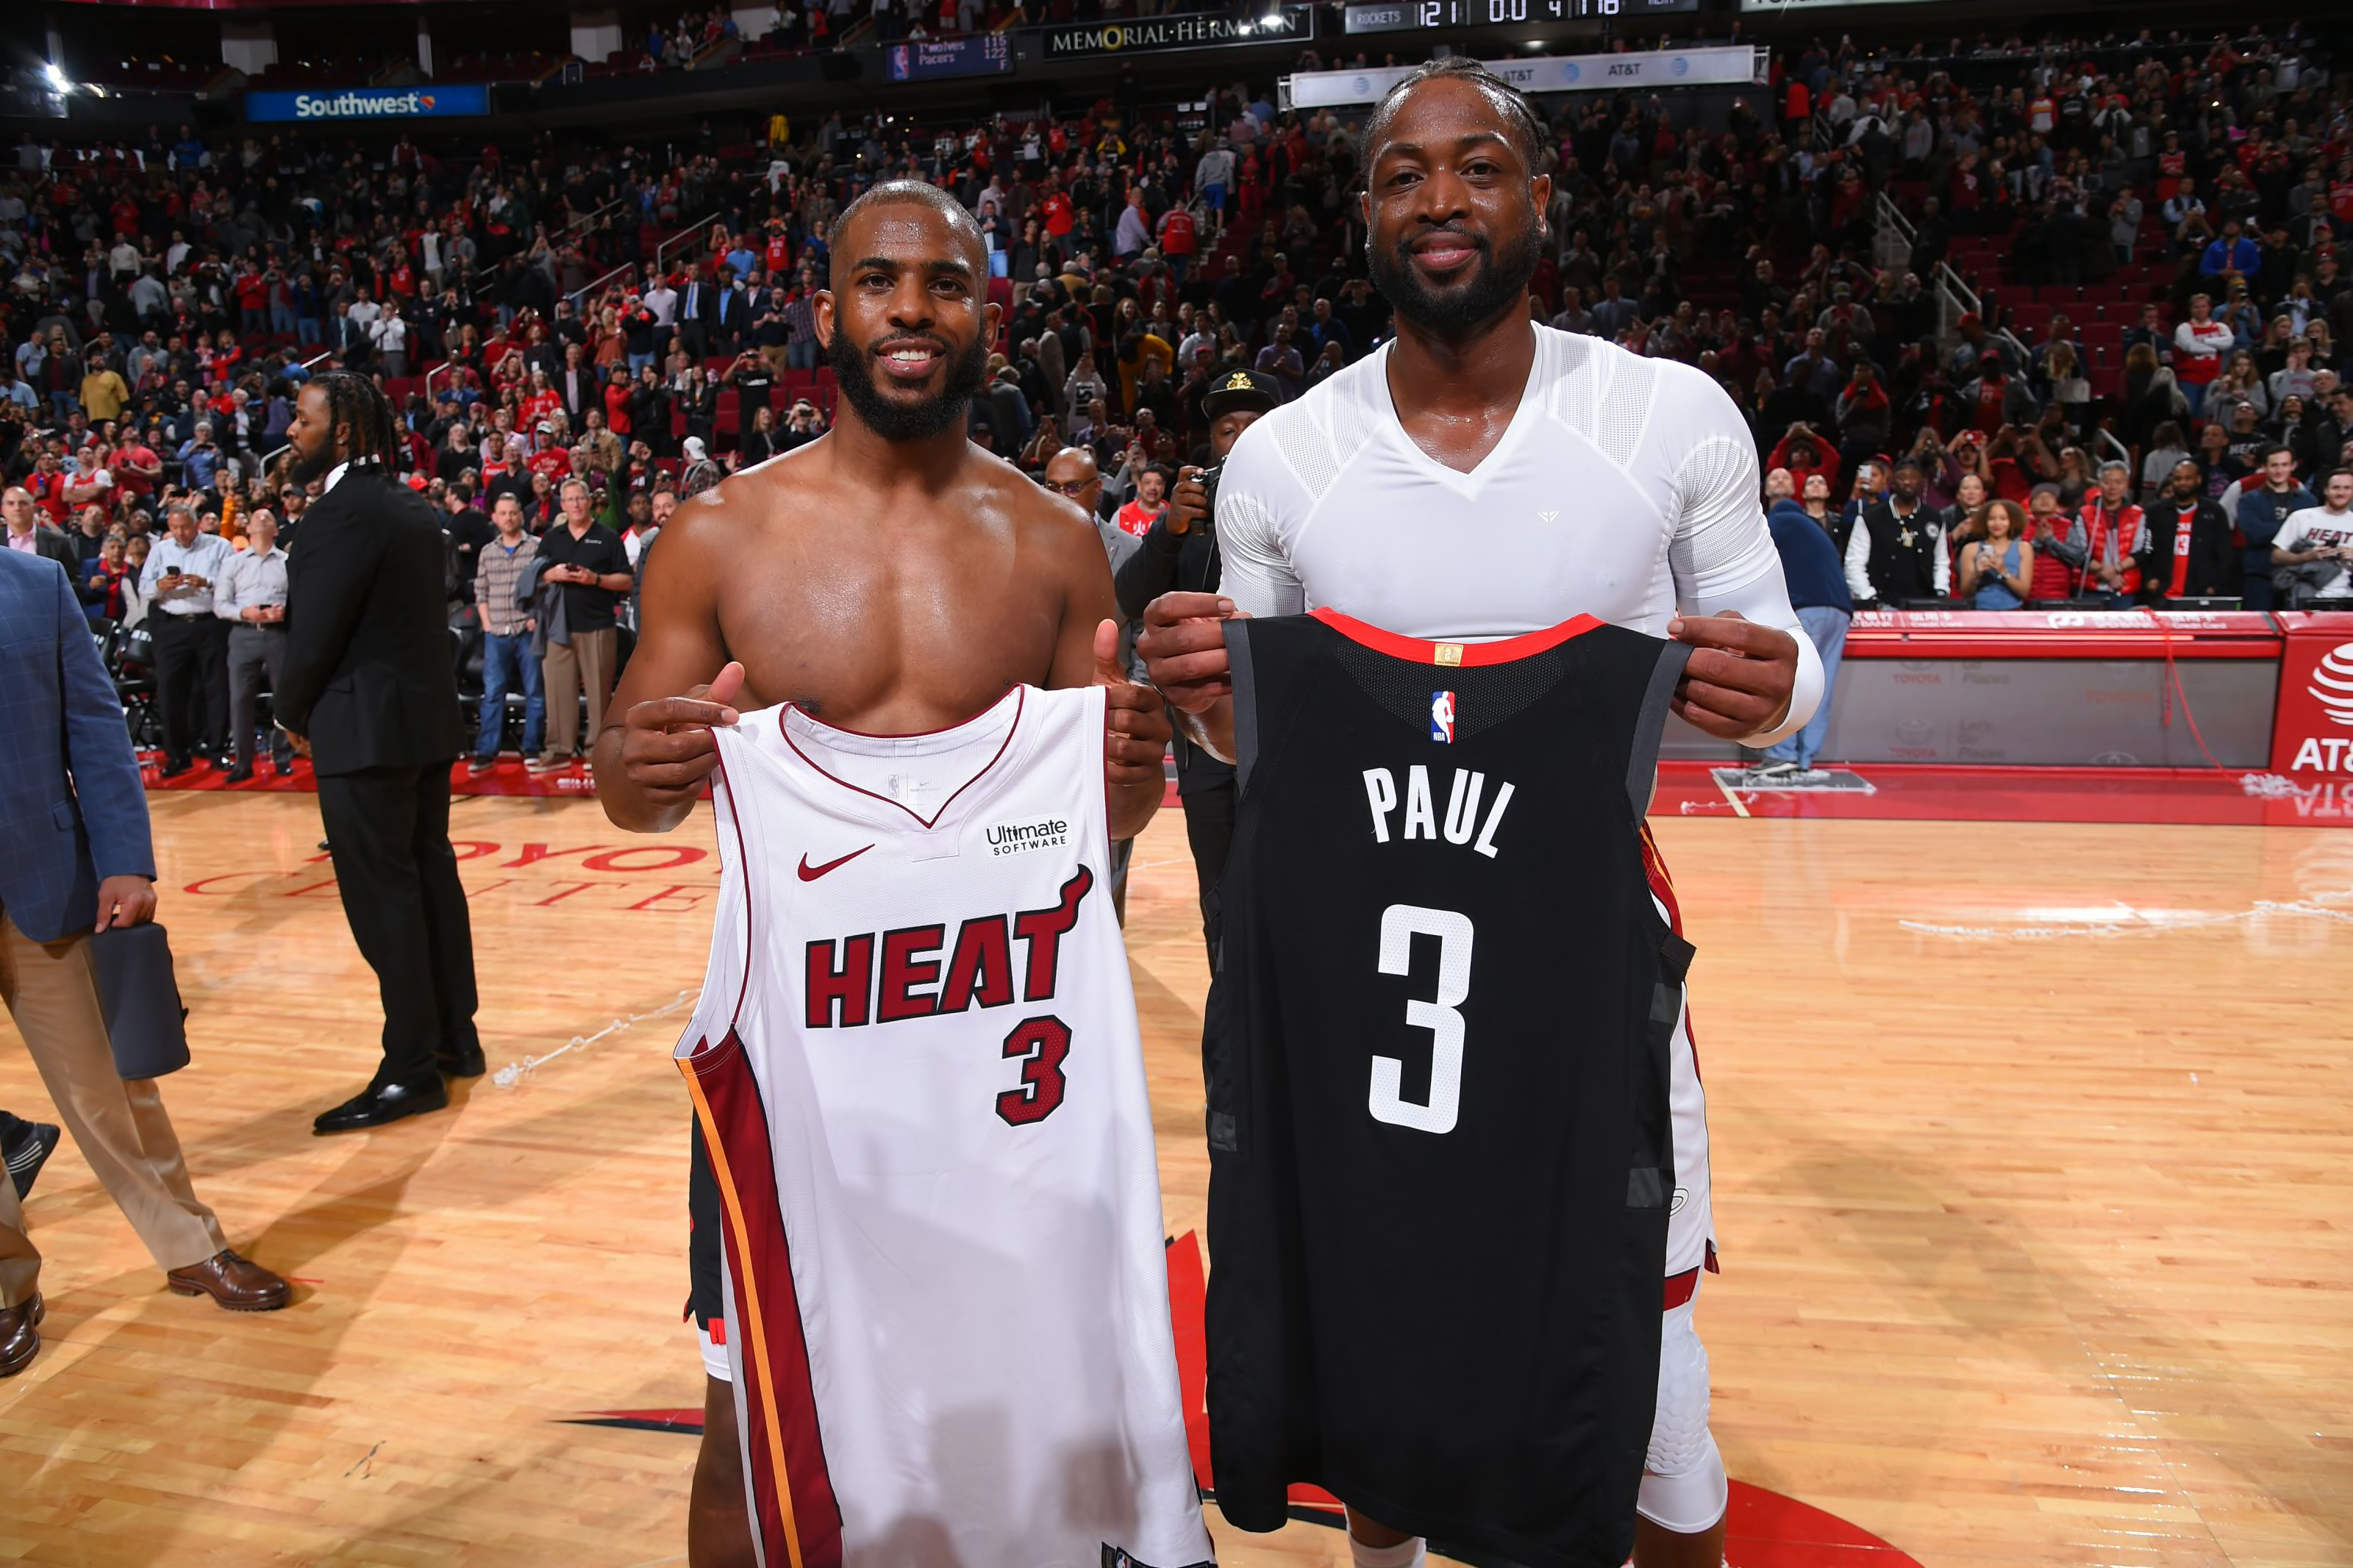 Miami Heat Is shedding contracts worth enough to take on CP3's deal?